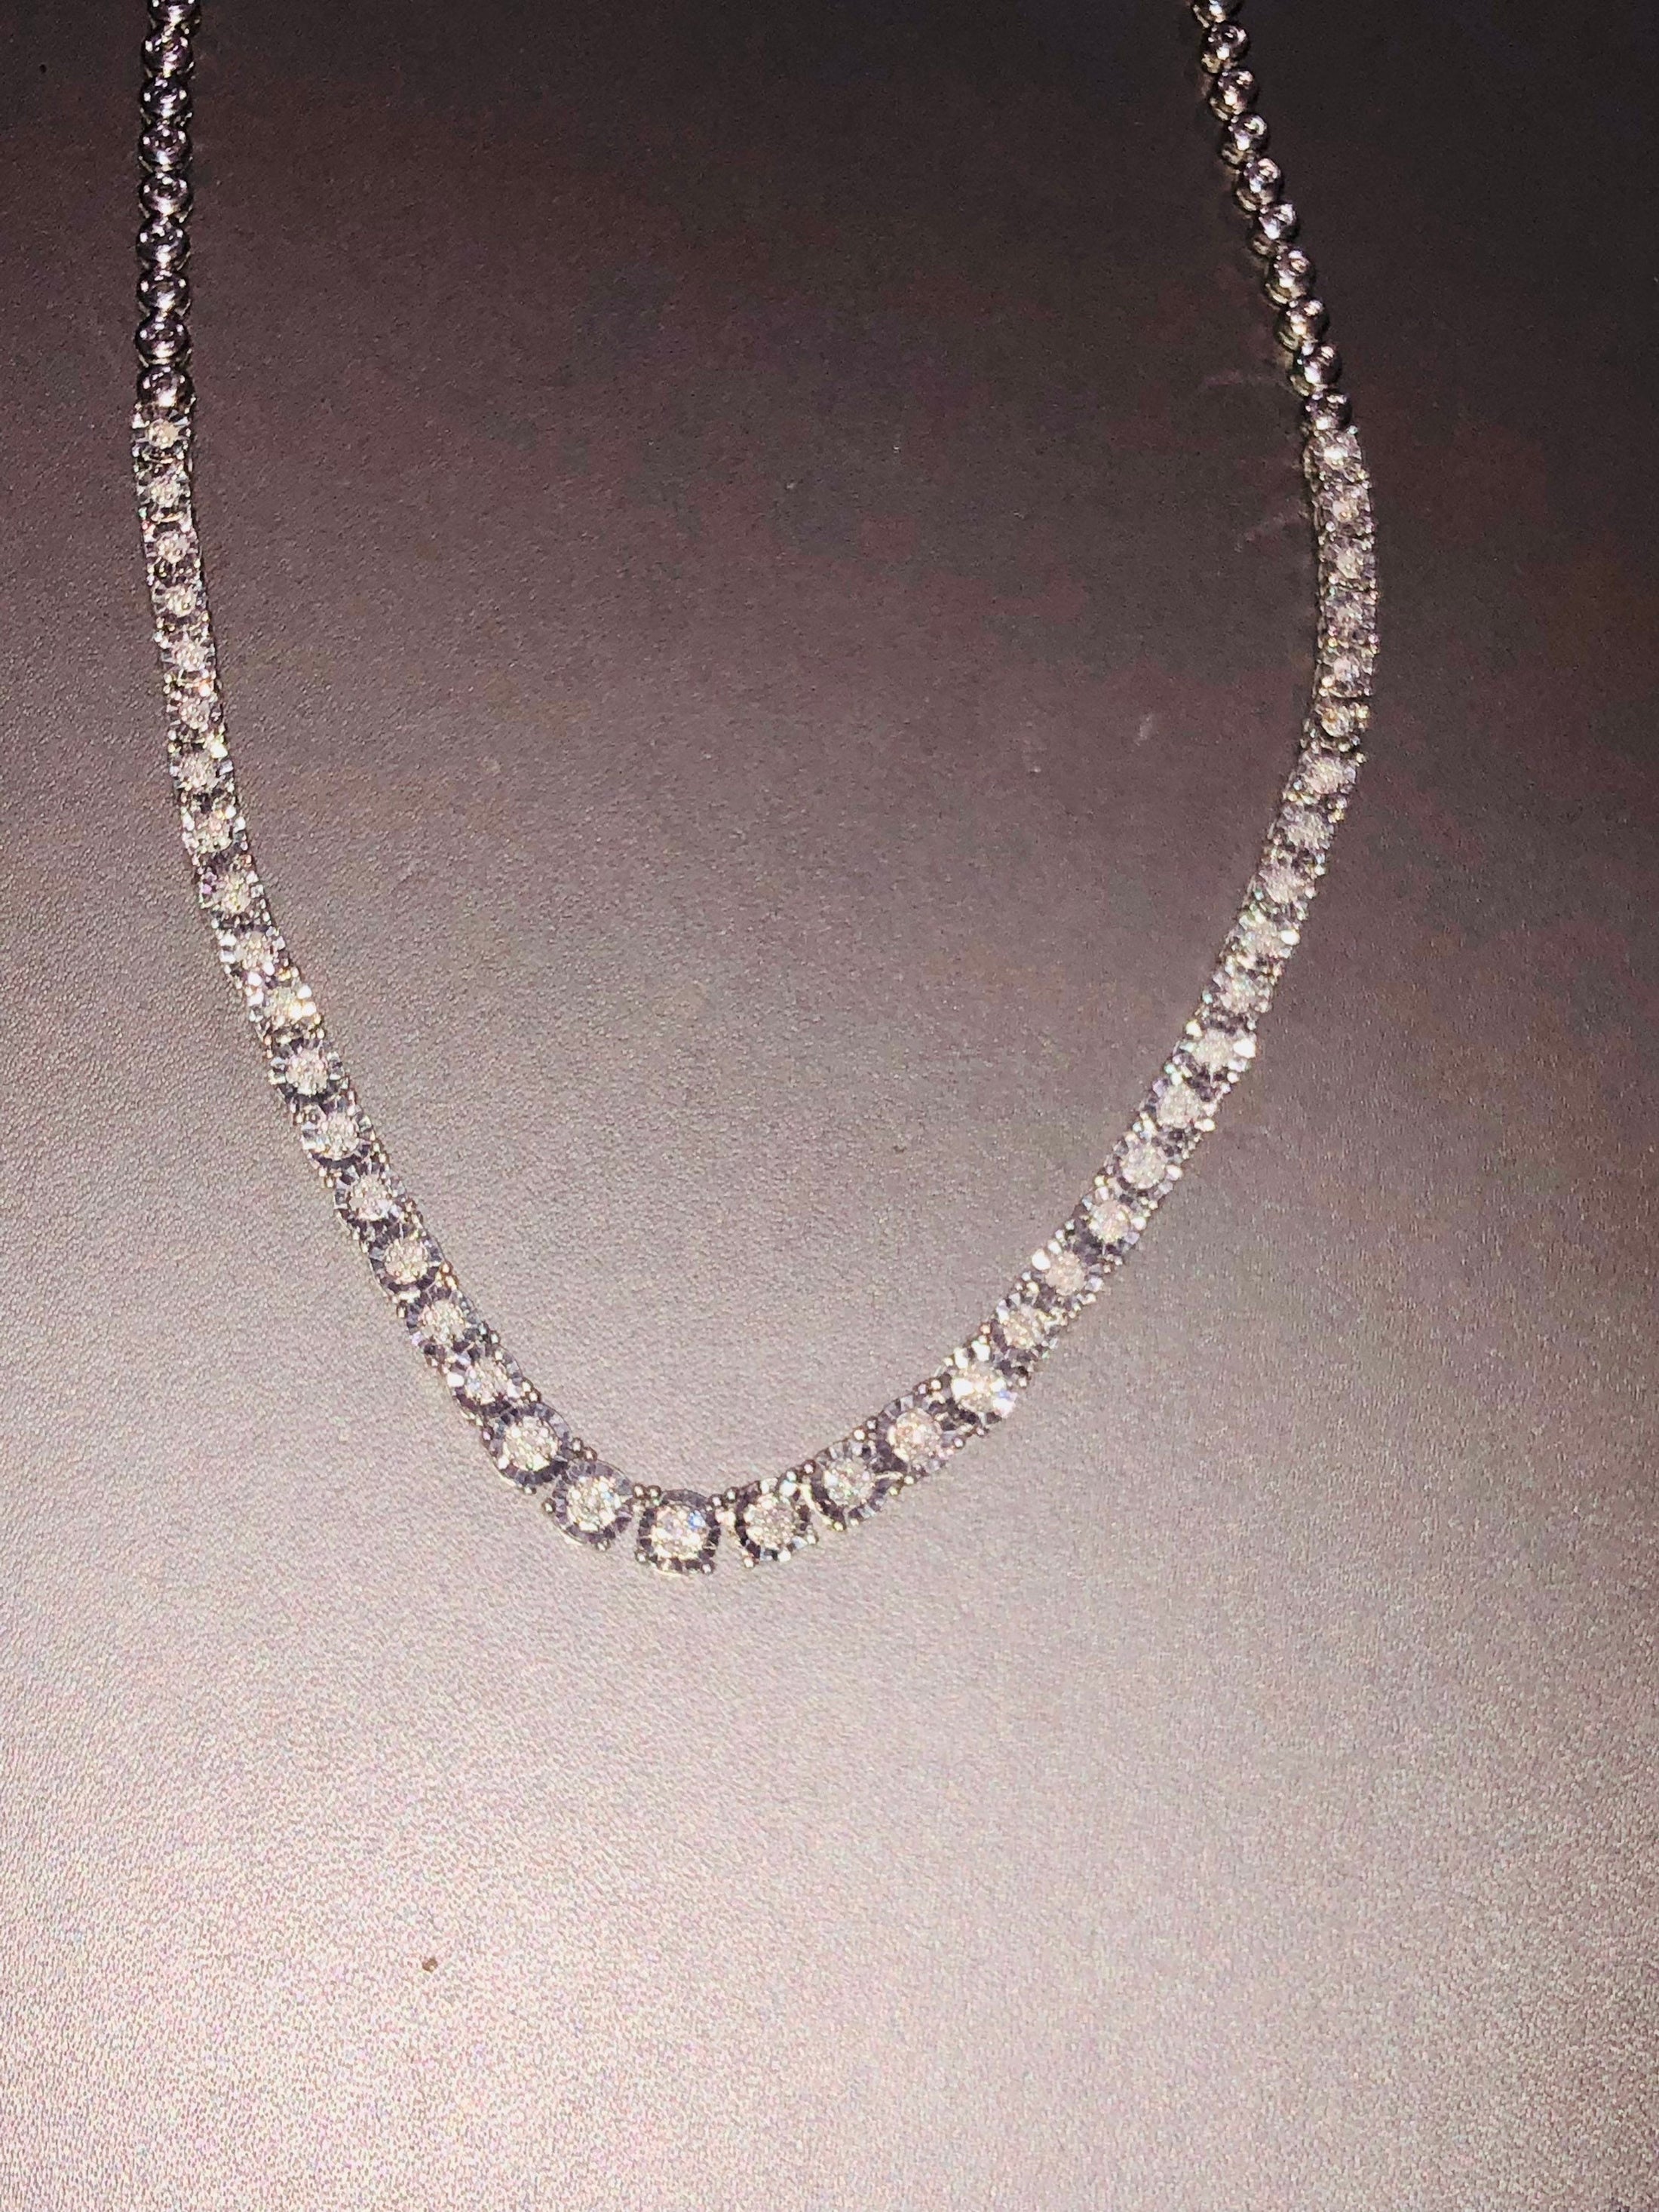 Real Diamond Tennis Chain Attract all eyes with this jaw-dropping diamond tennis necklace white gold vermeil best gift holiday